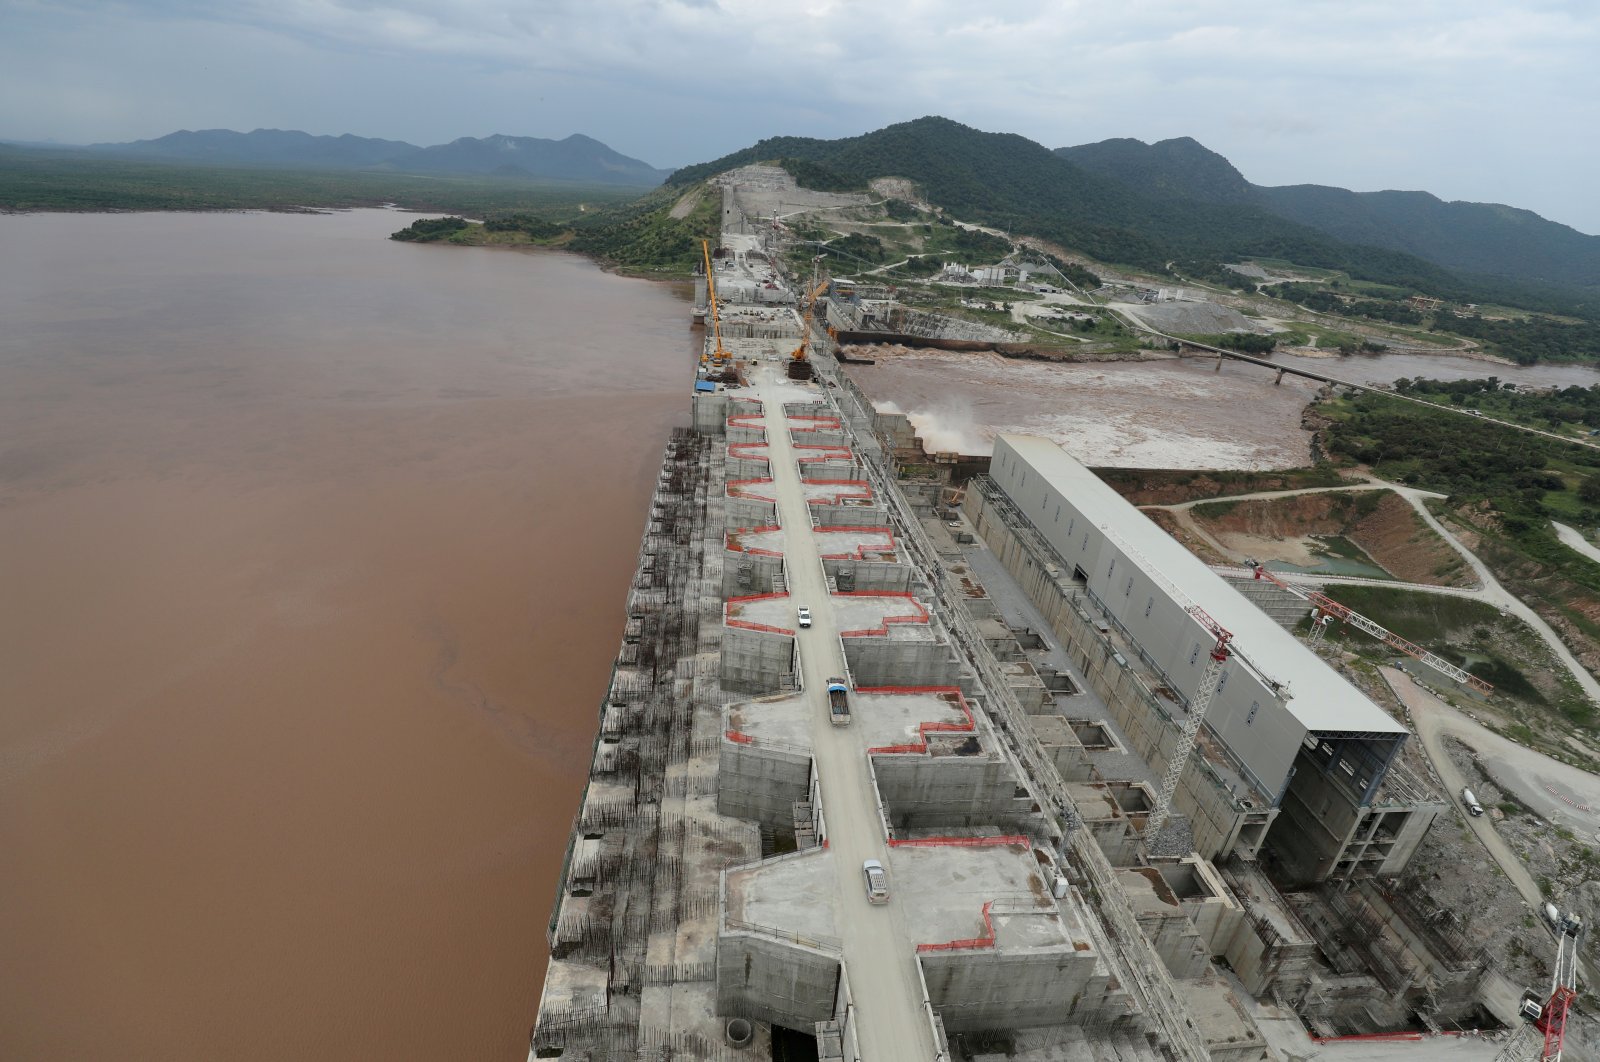 The UN Security Council supports AU mediation efforts for the Ethiopian dam